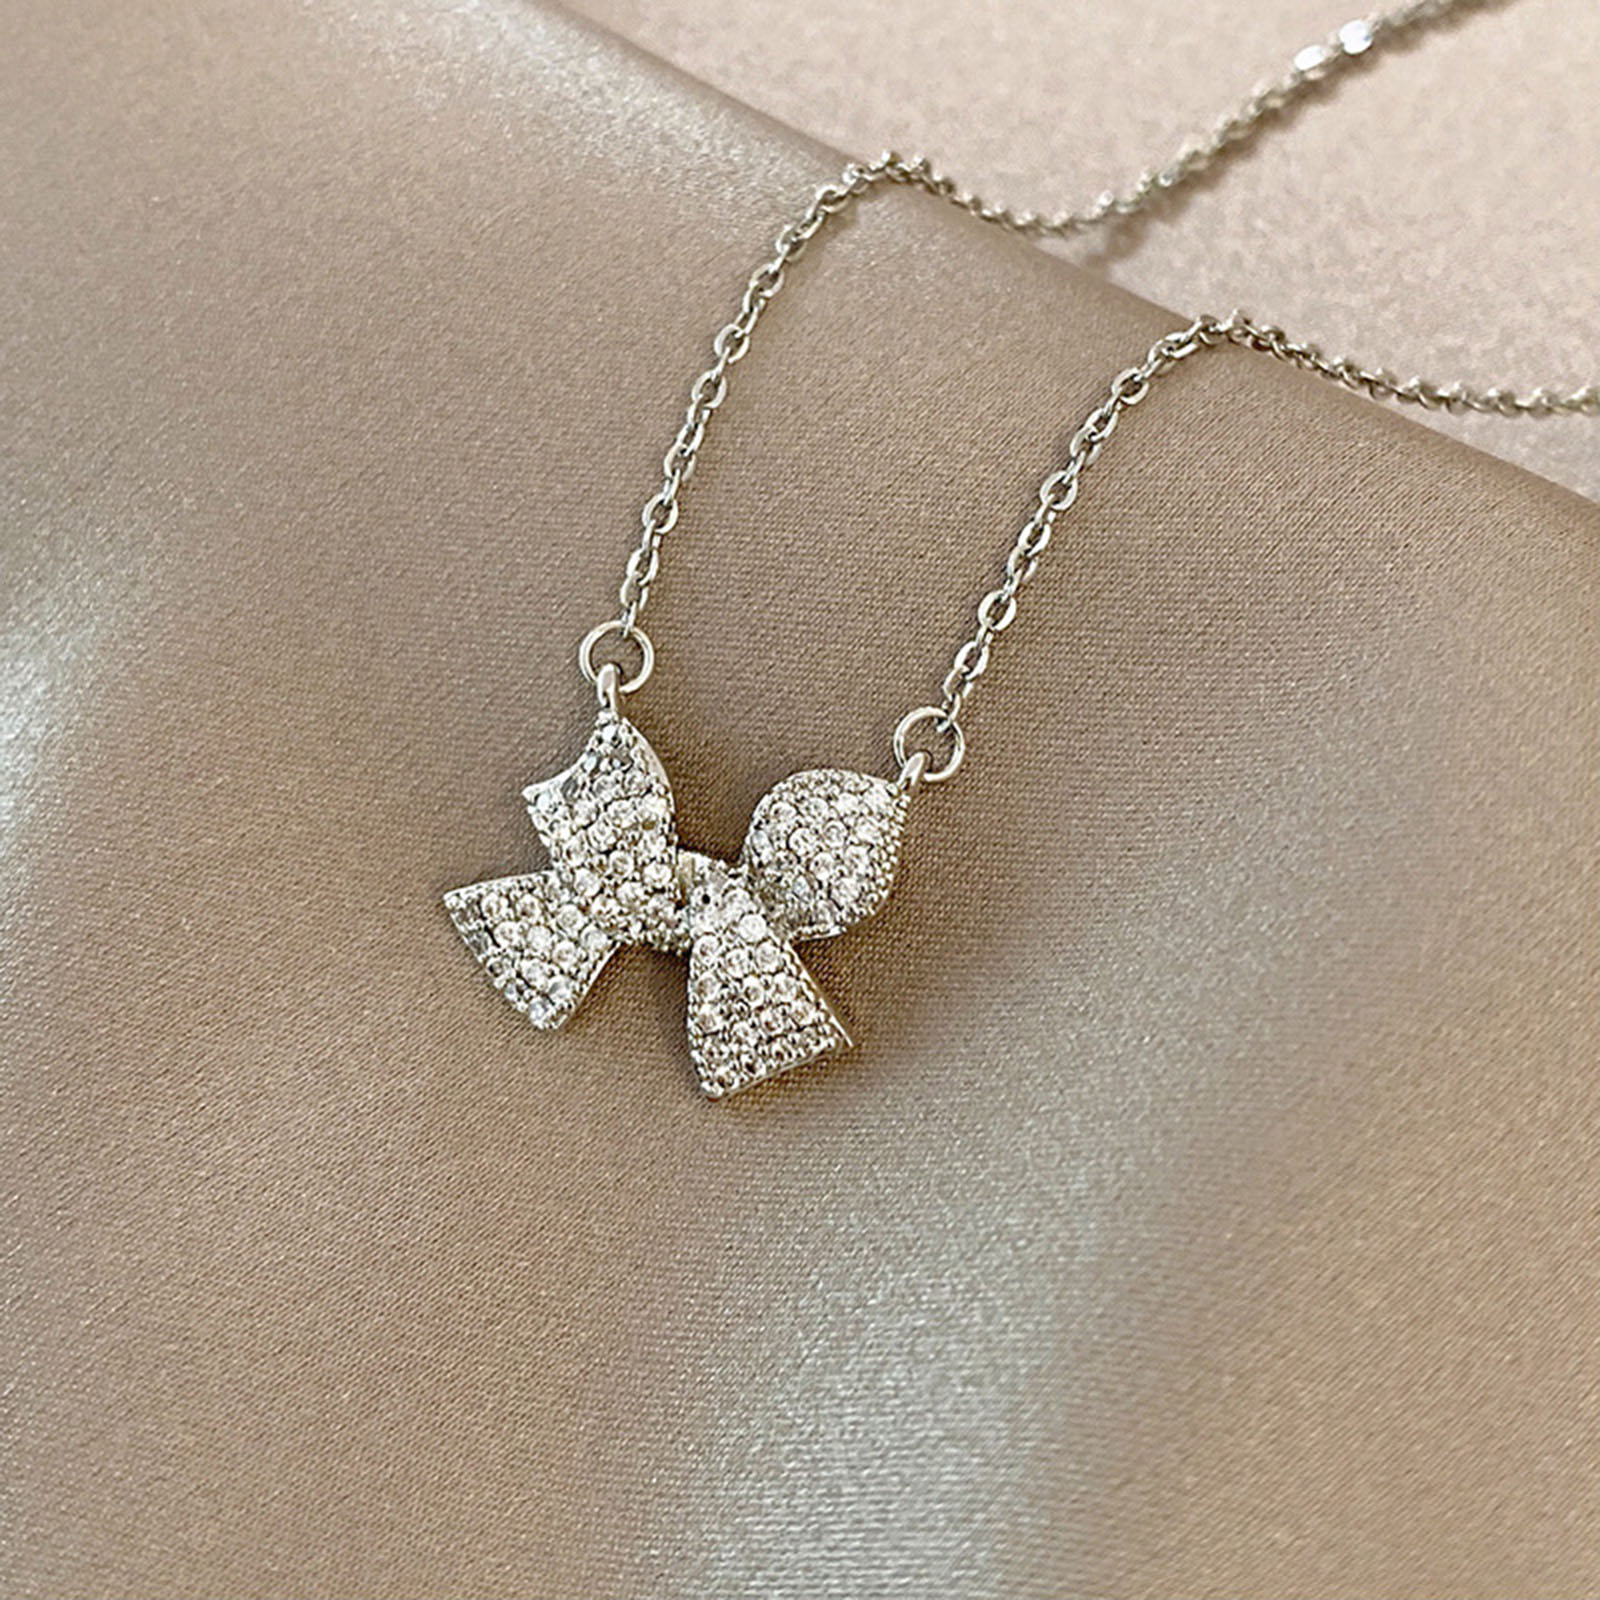 Picture of Stainless Steel Necklace Silver Tone Bowknot Clear Rhinestone 40cm(15 6/8") long, 1 Piece